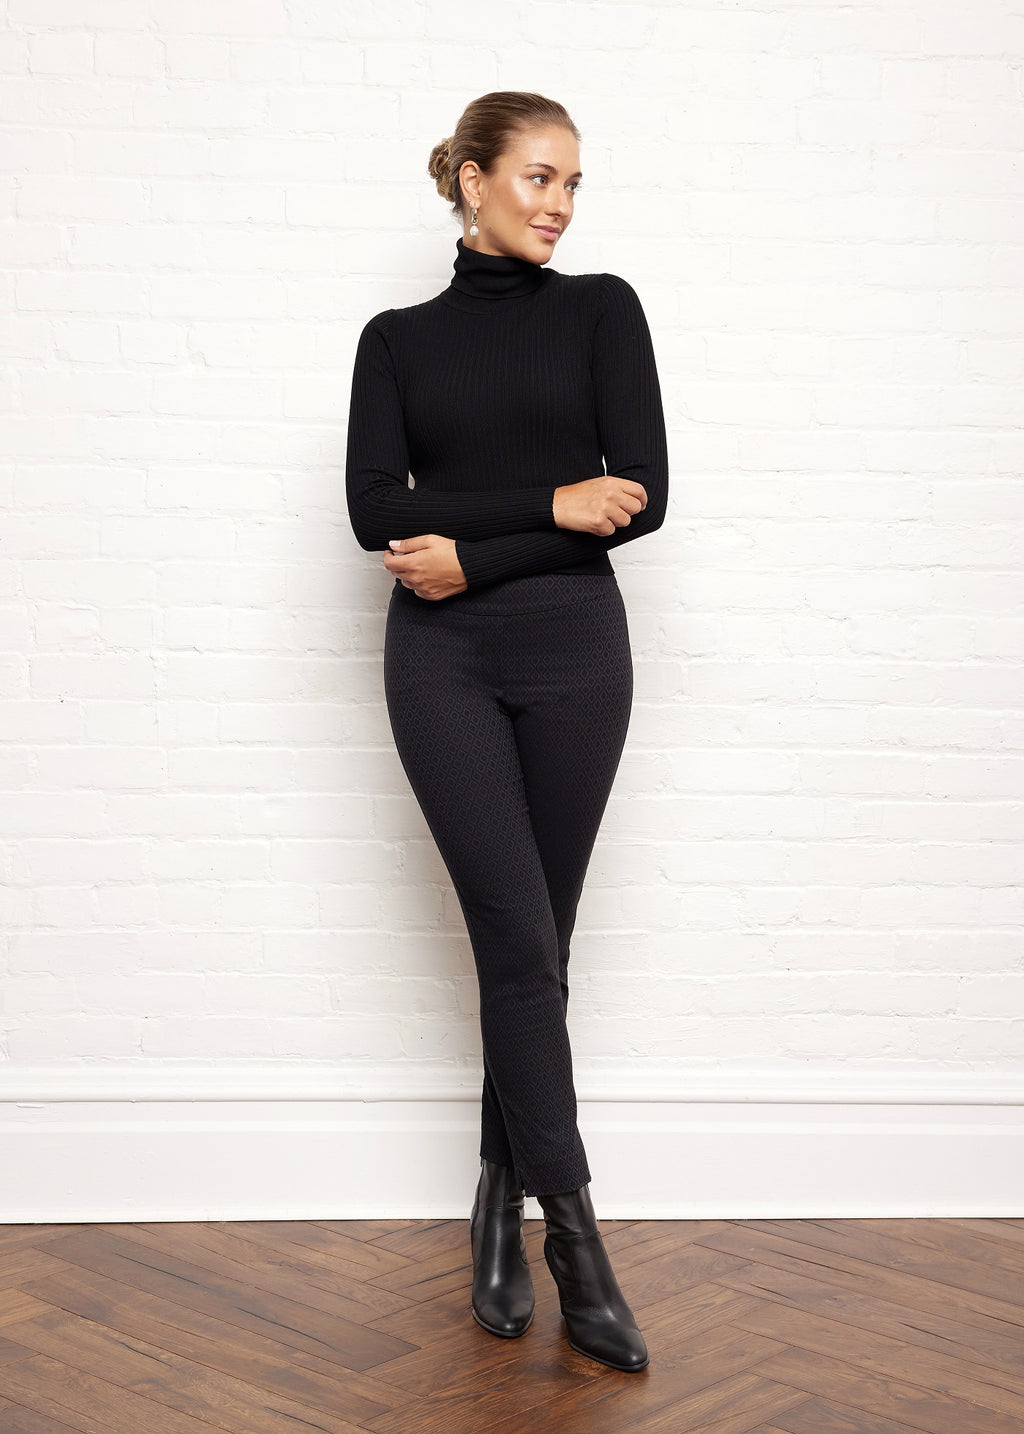 Our 5 best slimming outfit tips for back-to-work – SLIMMING PANT